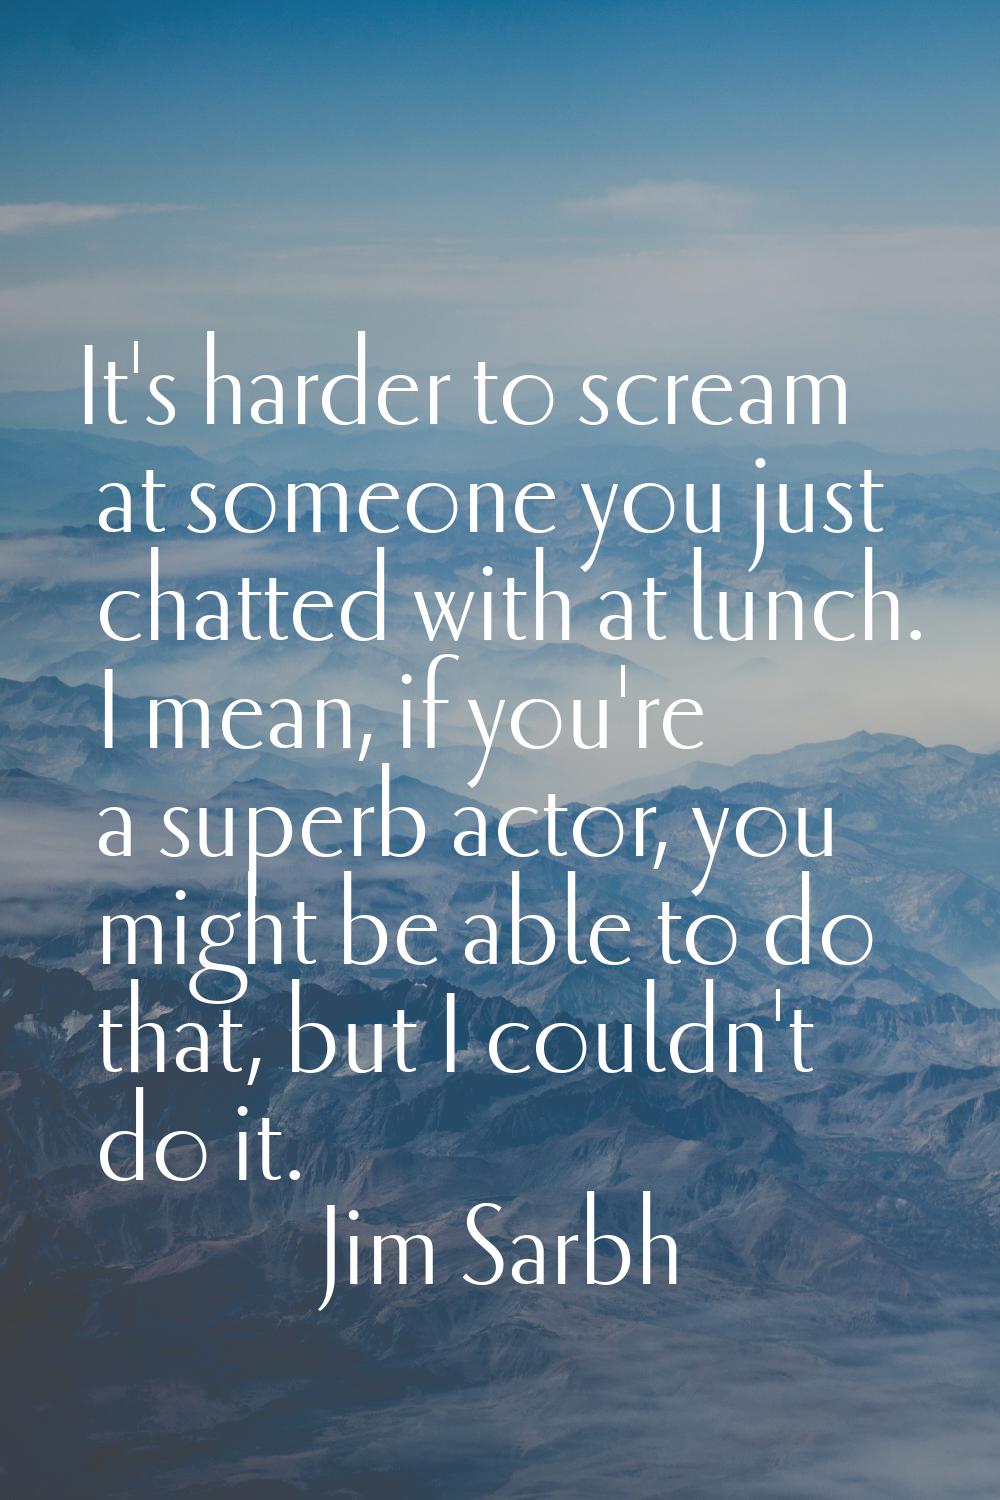 It's harder to scream at someone you just chatted with at lunch. I mean, if you're a superb actor, 